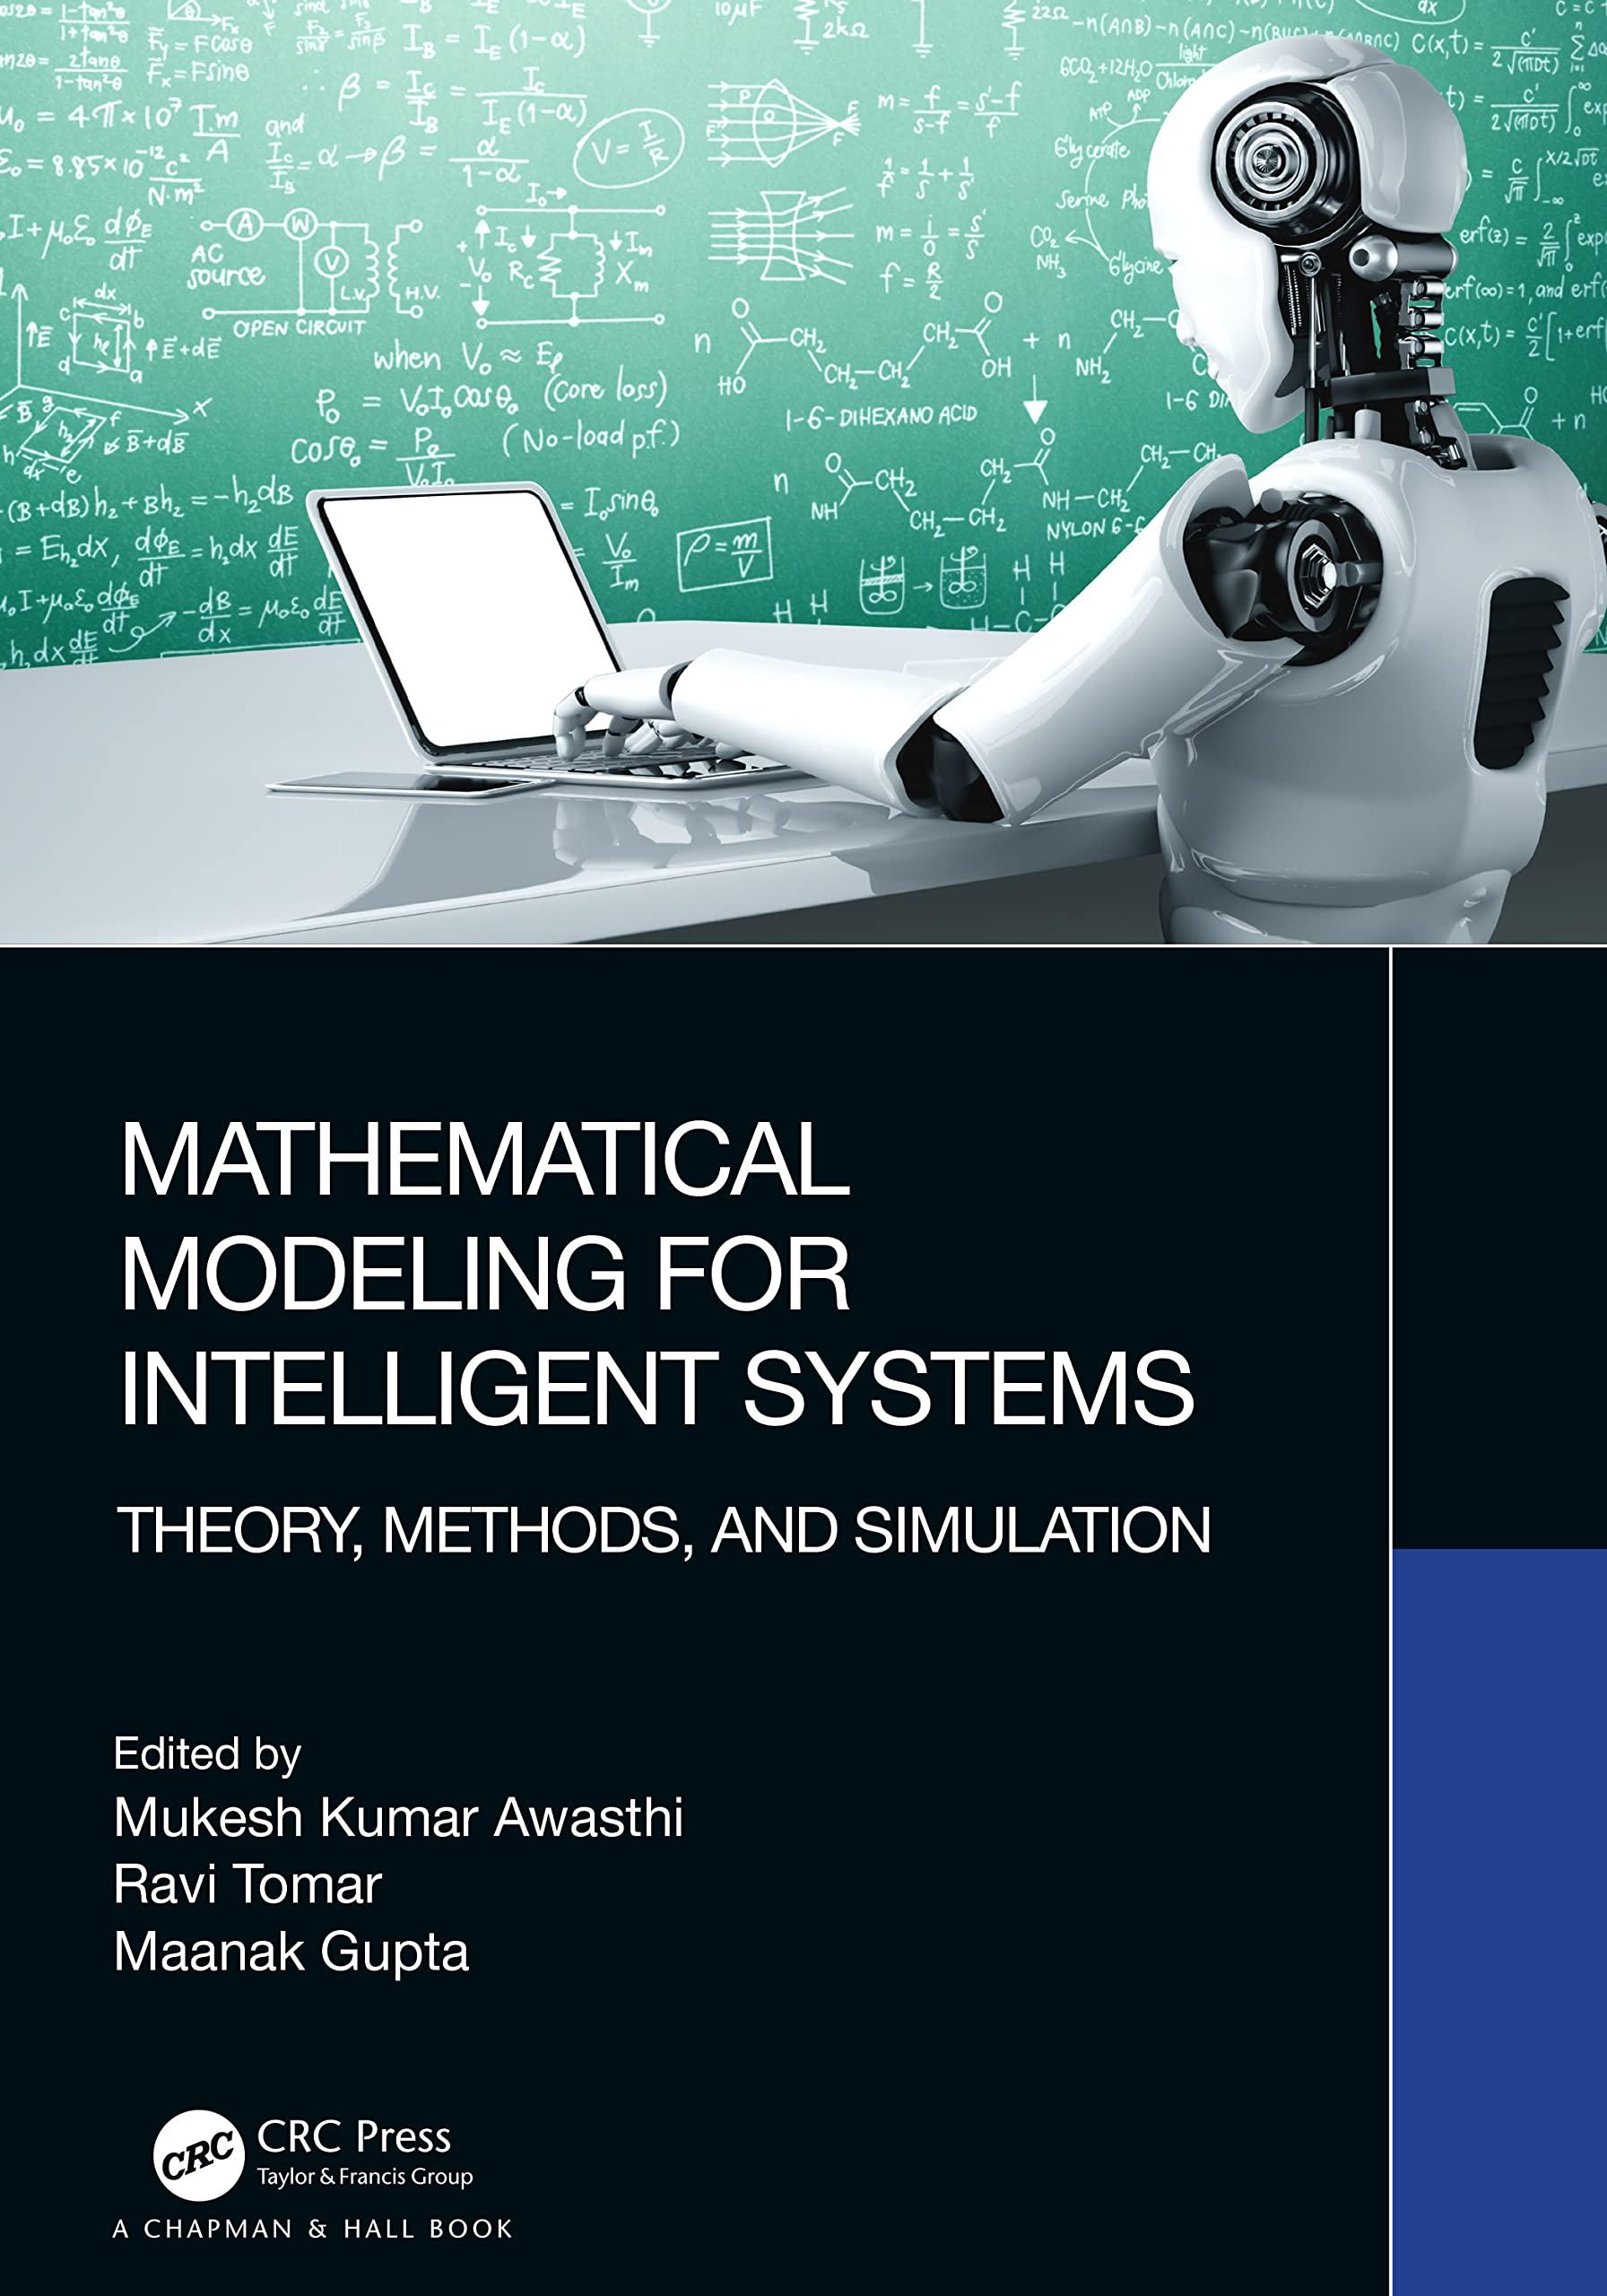 mathematical modeling for intelligent systems theory methods and simulation 1st edition mukesh kumar awasthi,